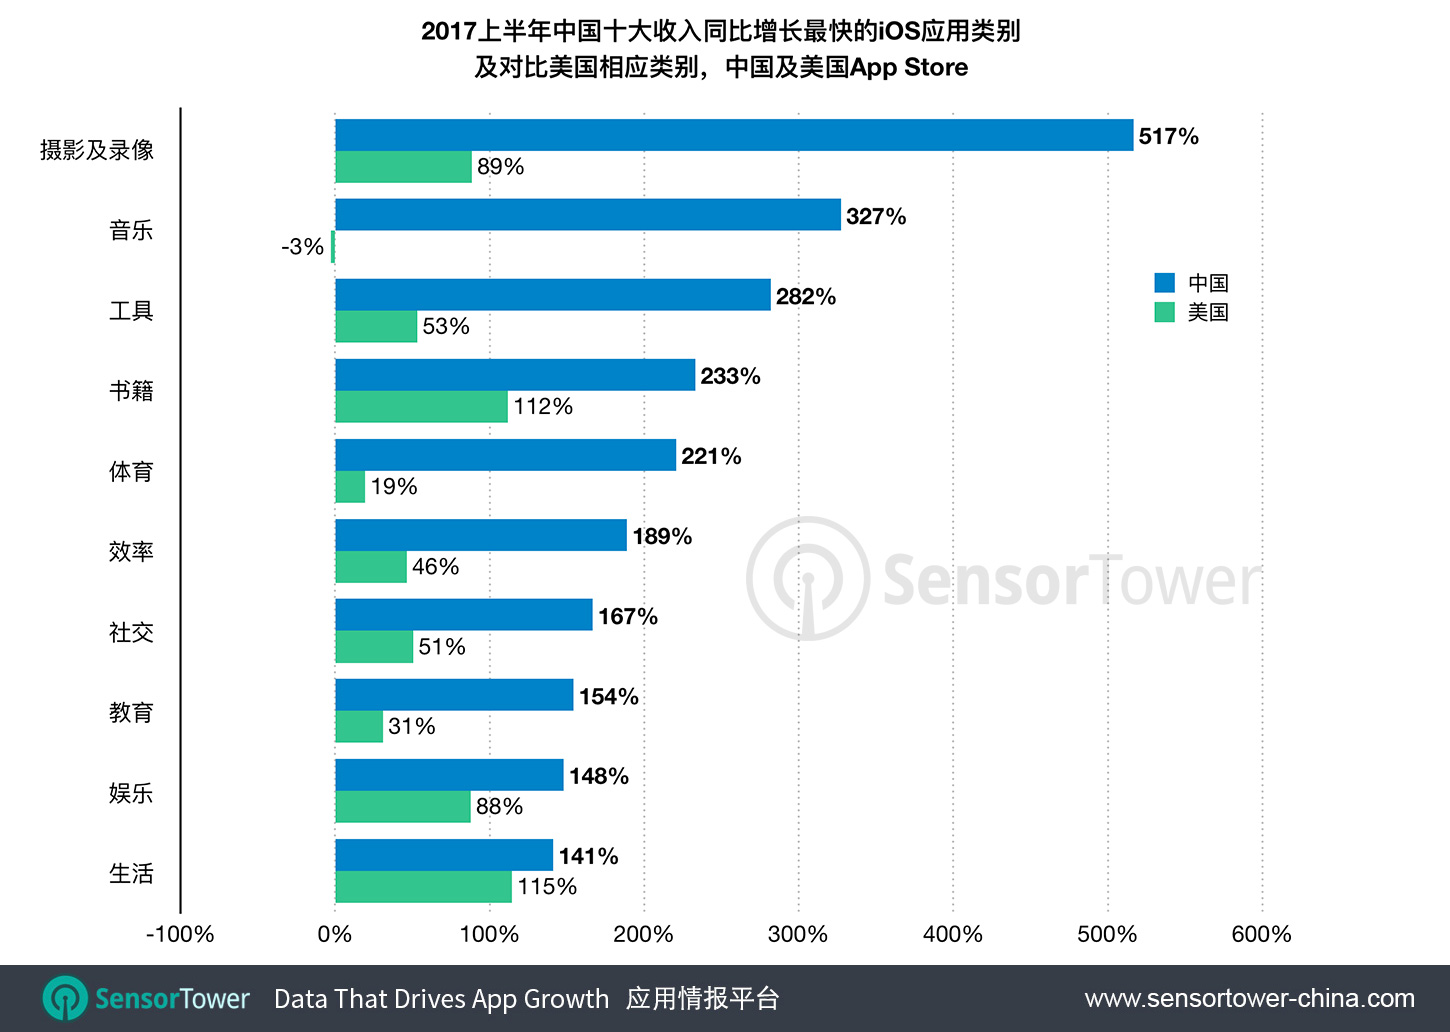 Year-over-year category revenue growth on the Chinese App Store